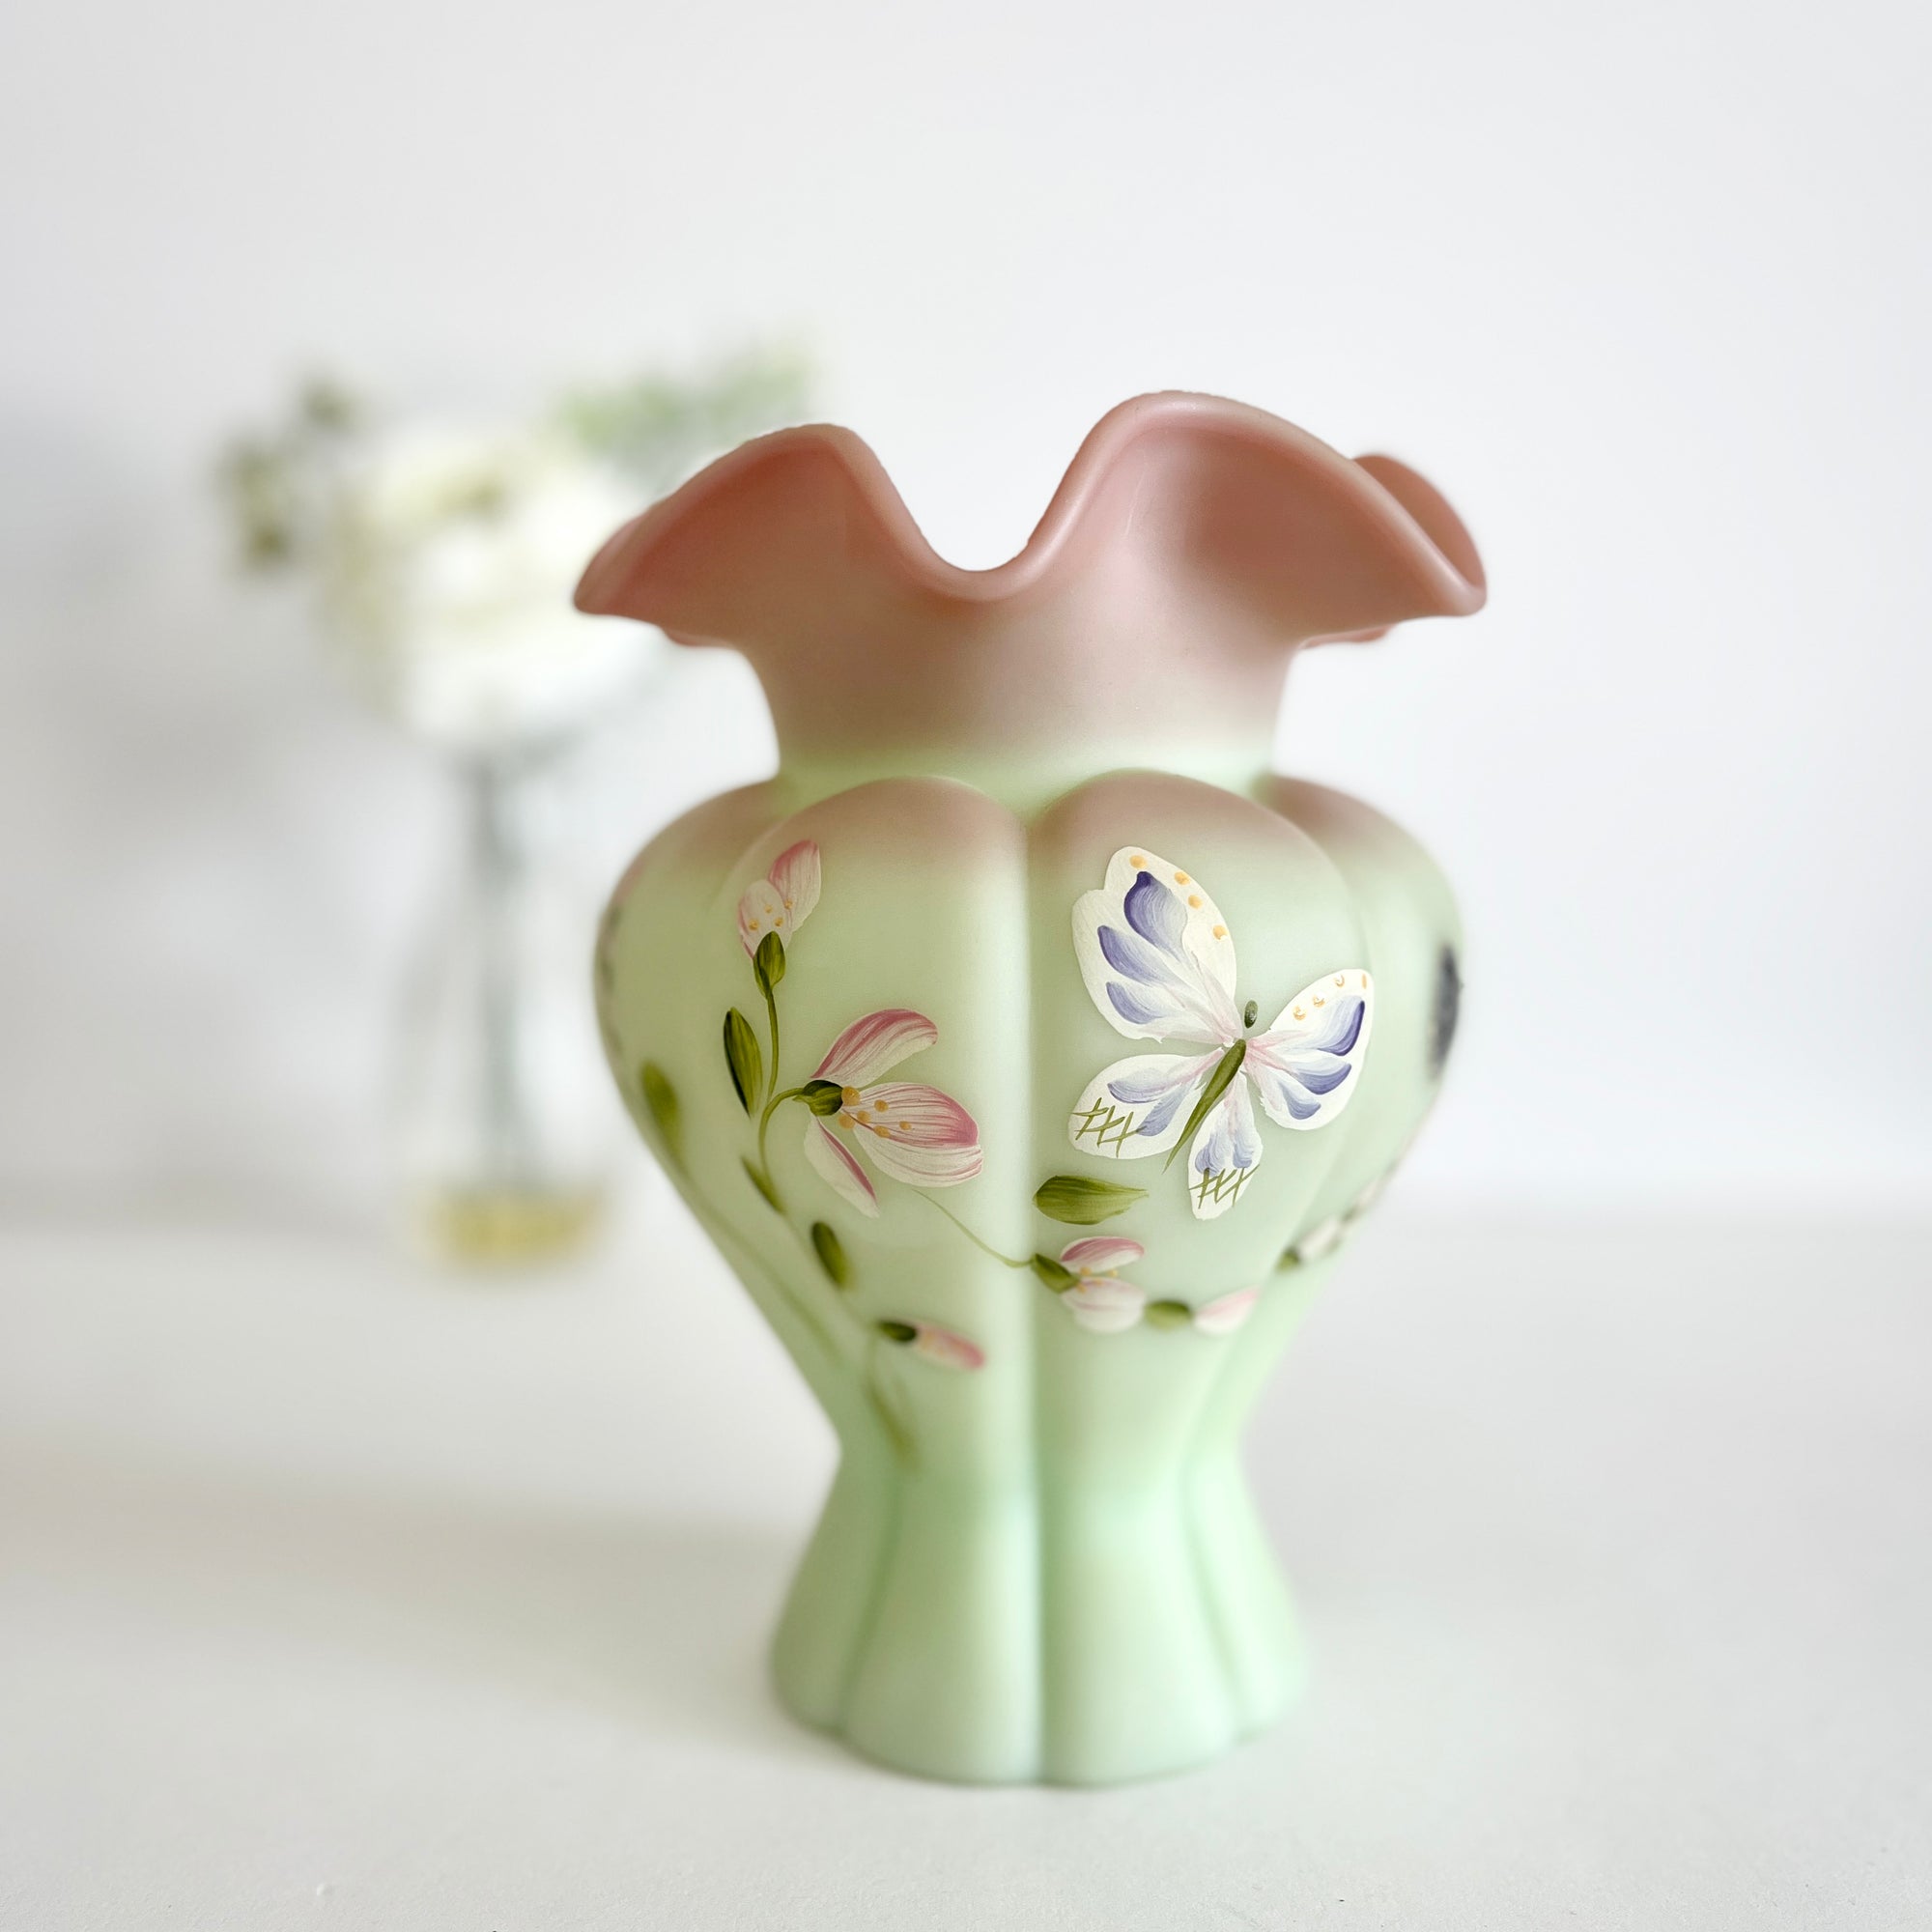 Fenton Limited Edition Hand painted 'Lotus Mist - Whispering Wings' Melon Vase